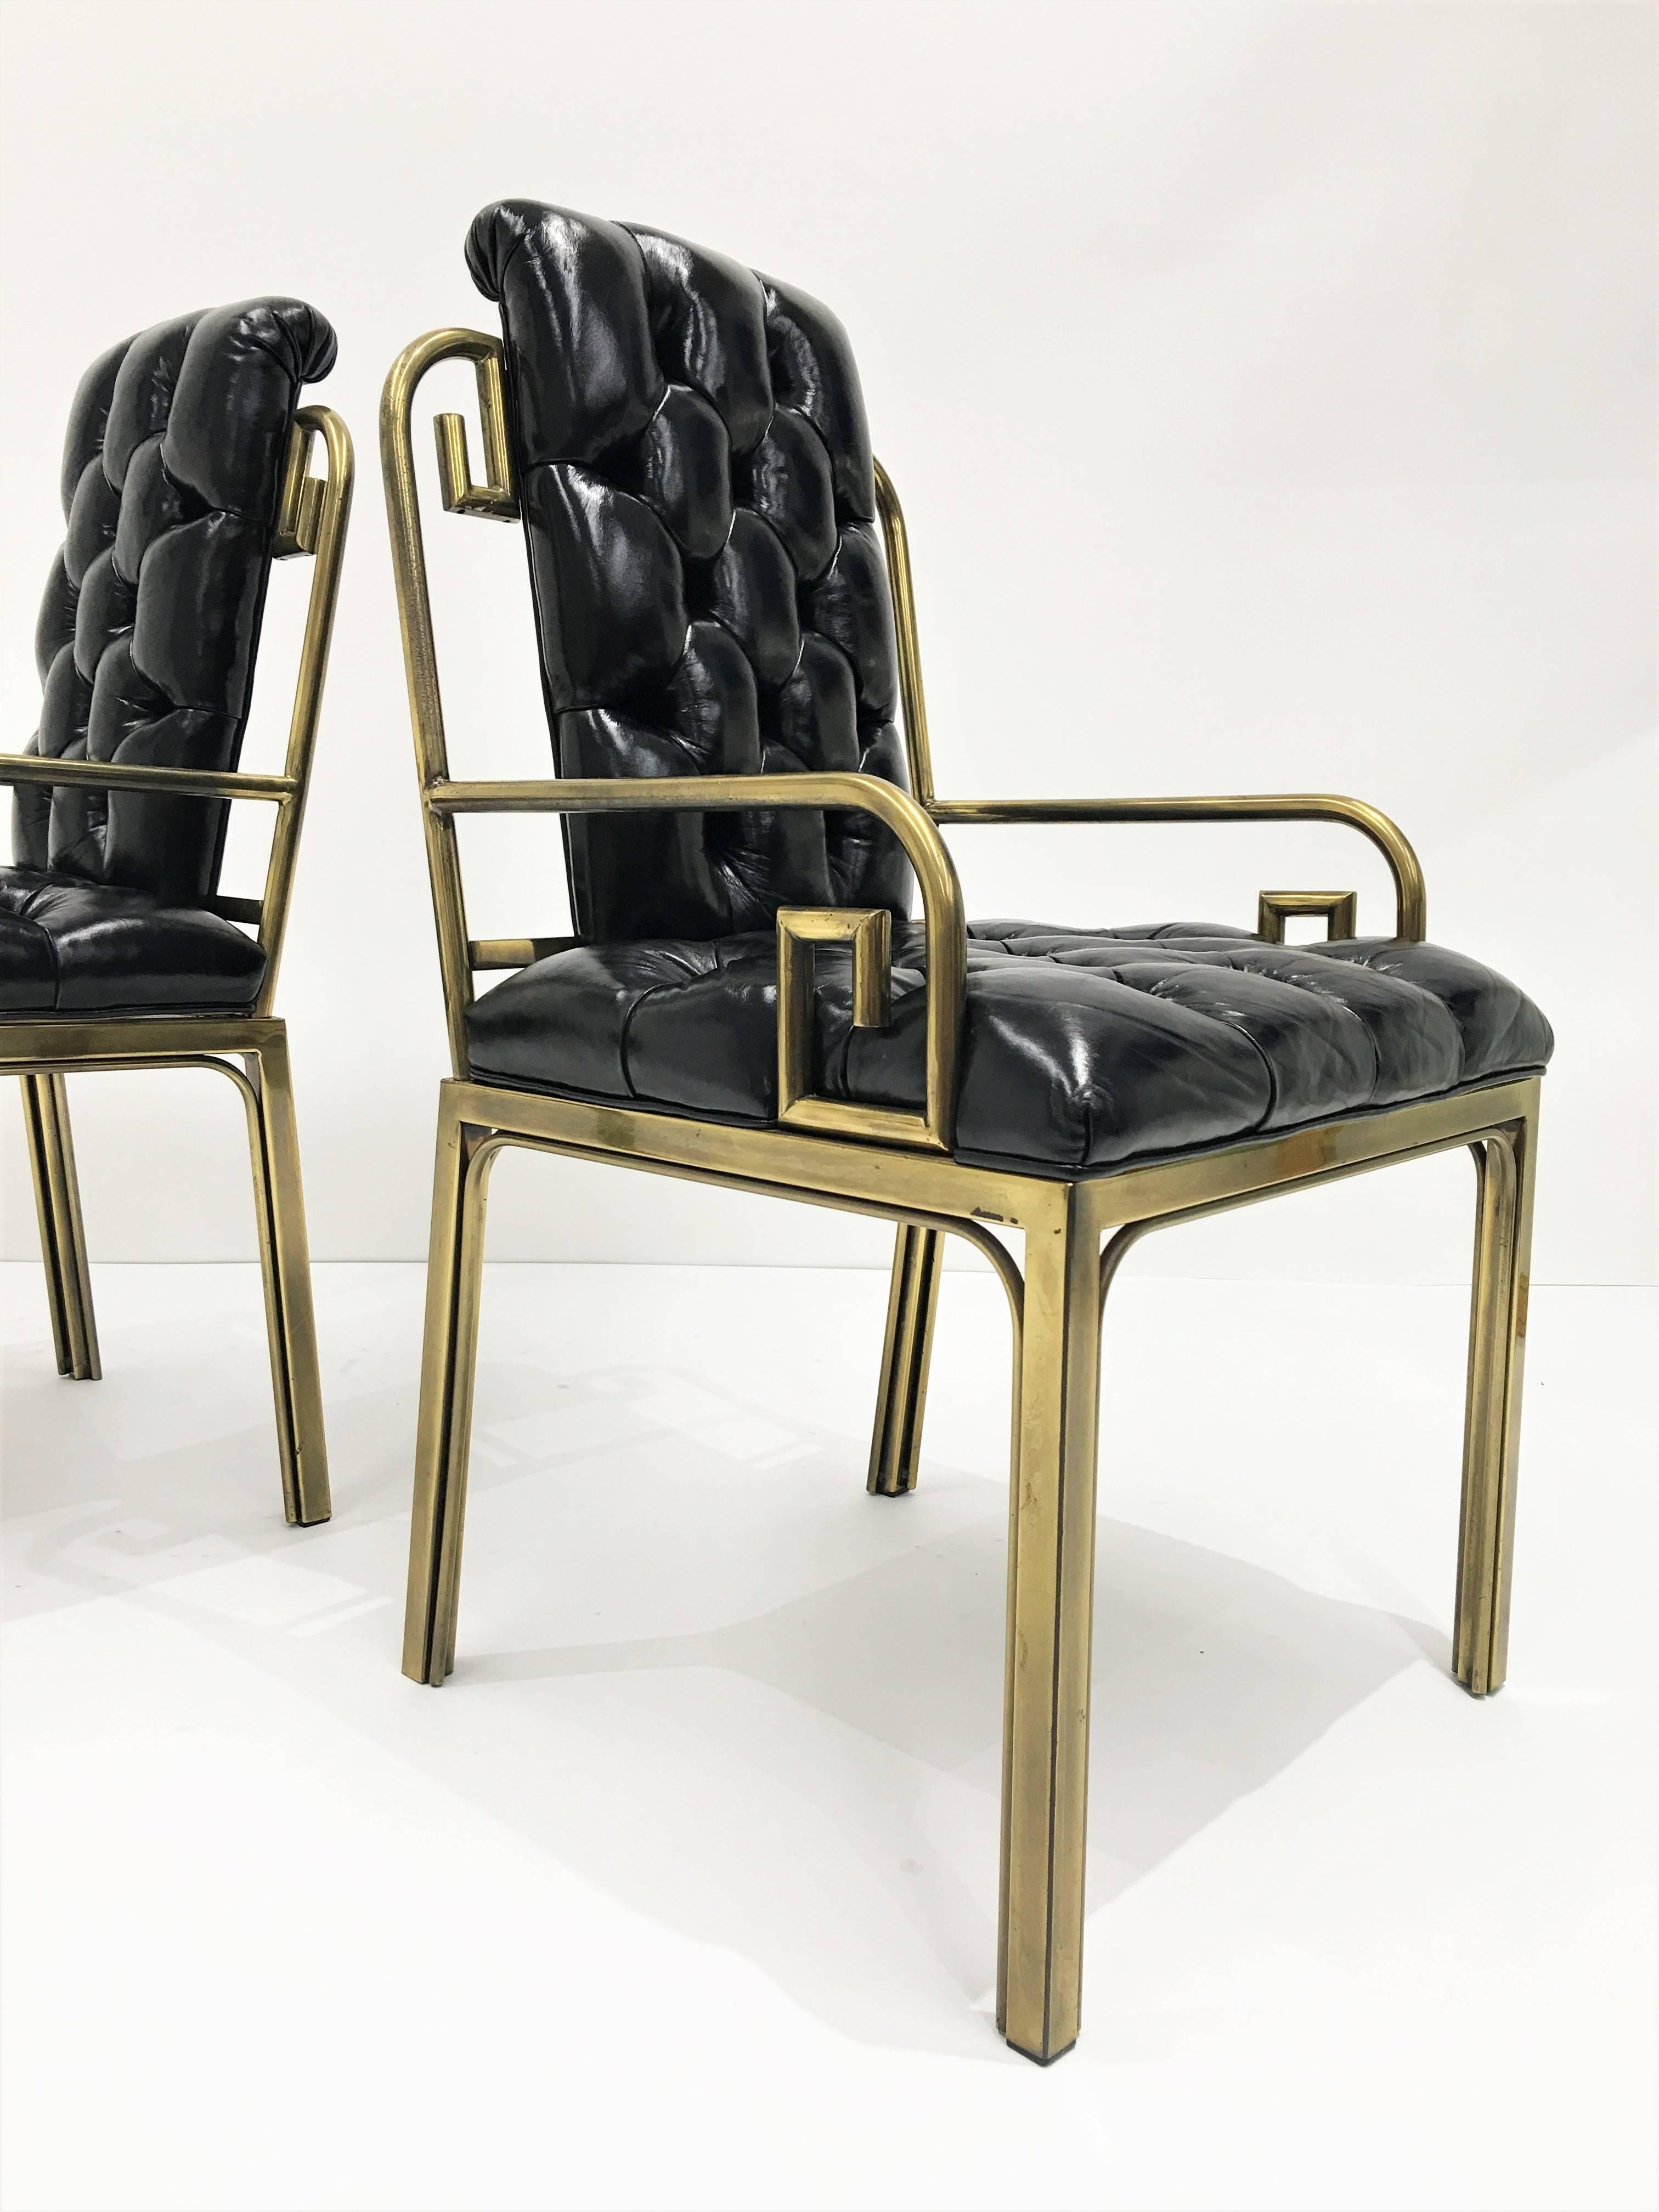 Stunning pair of 1960s Mastercraft dining chairs with Greek key details. They retain their original black leather upholstery. The brass retains its original warm patina.